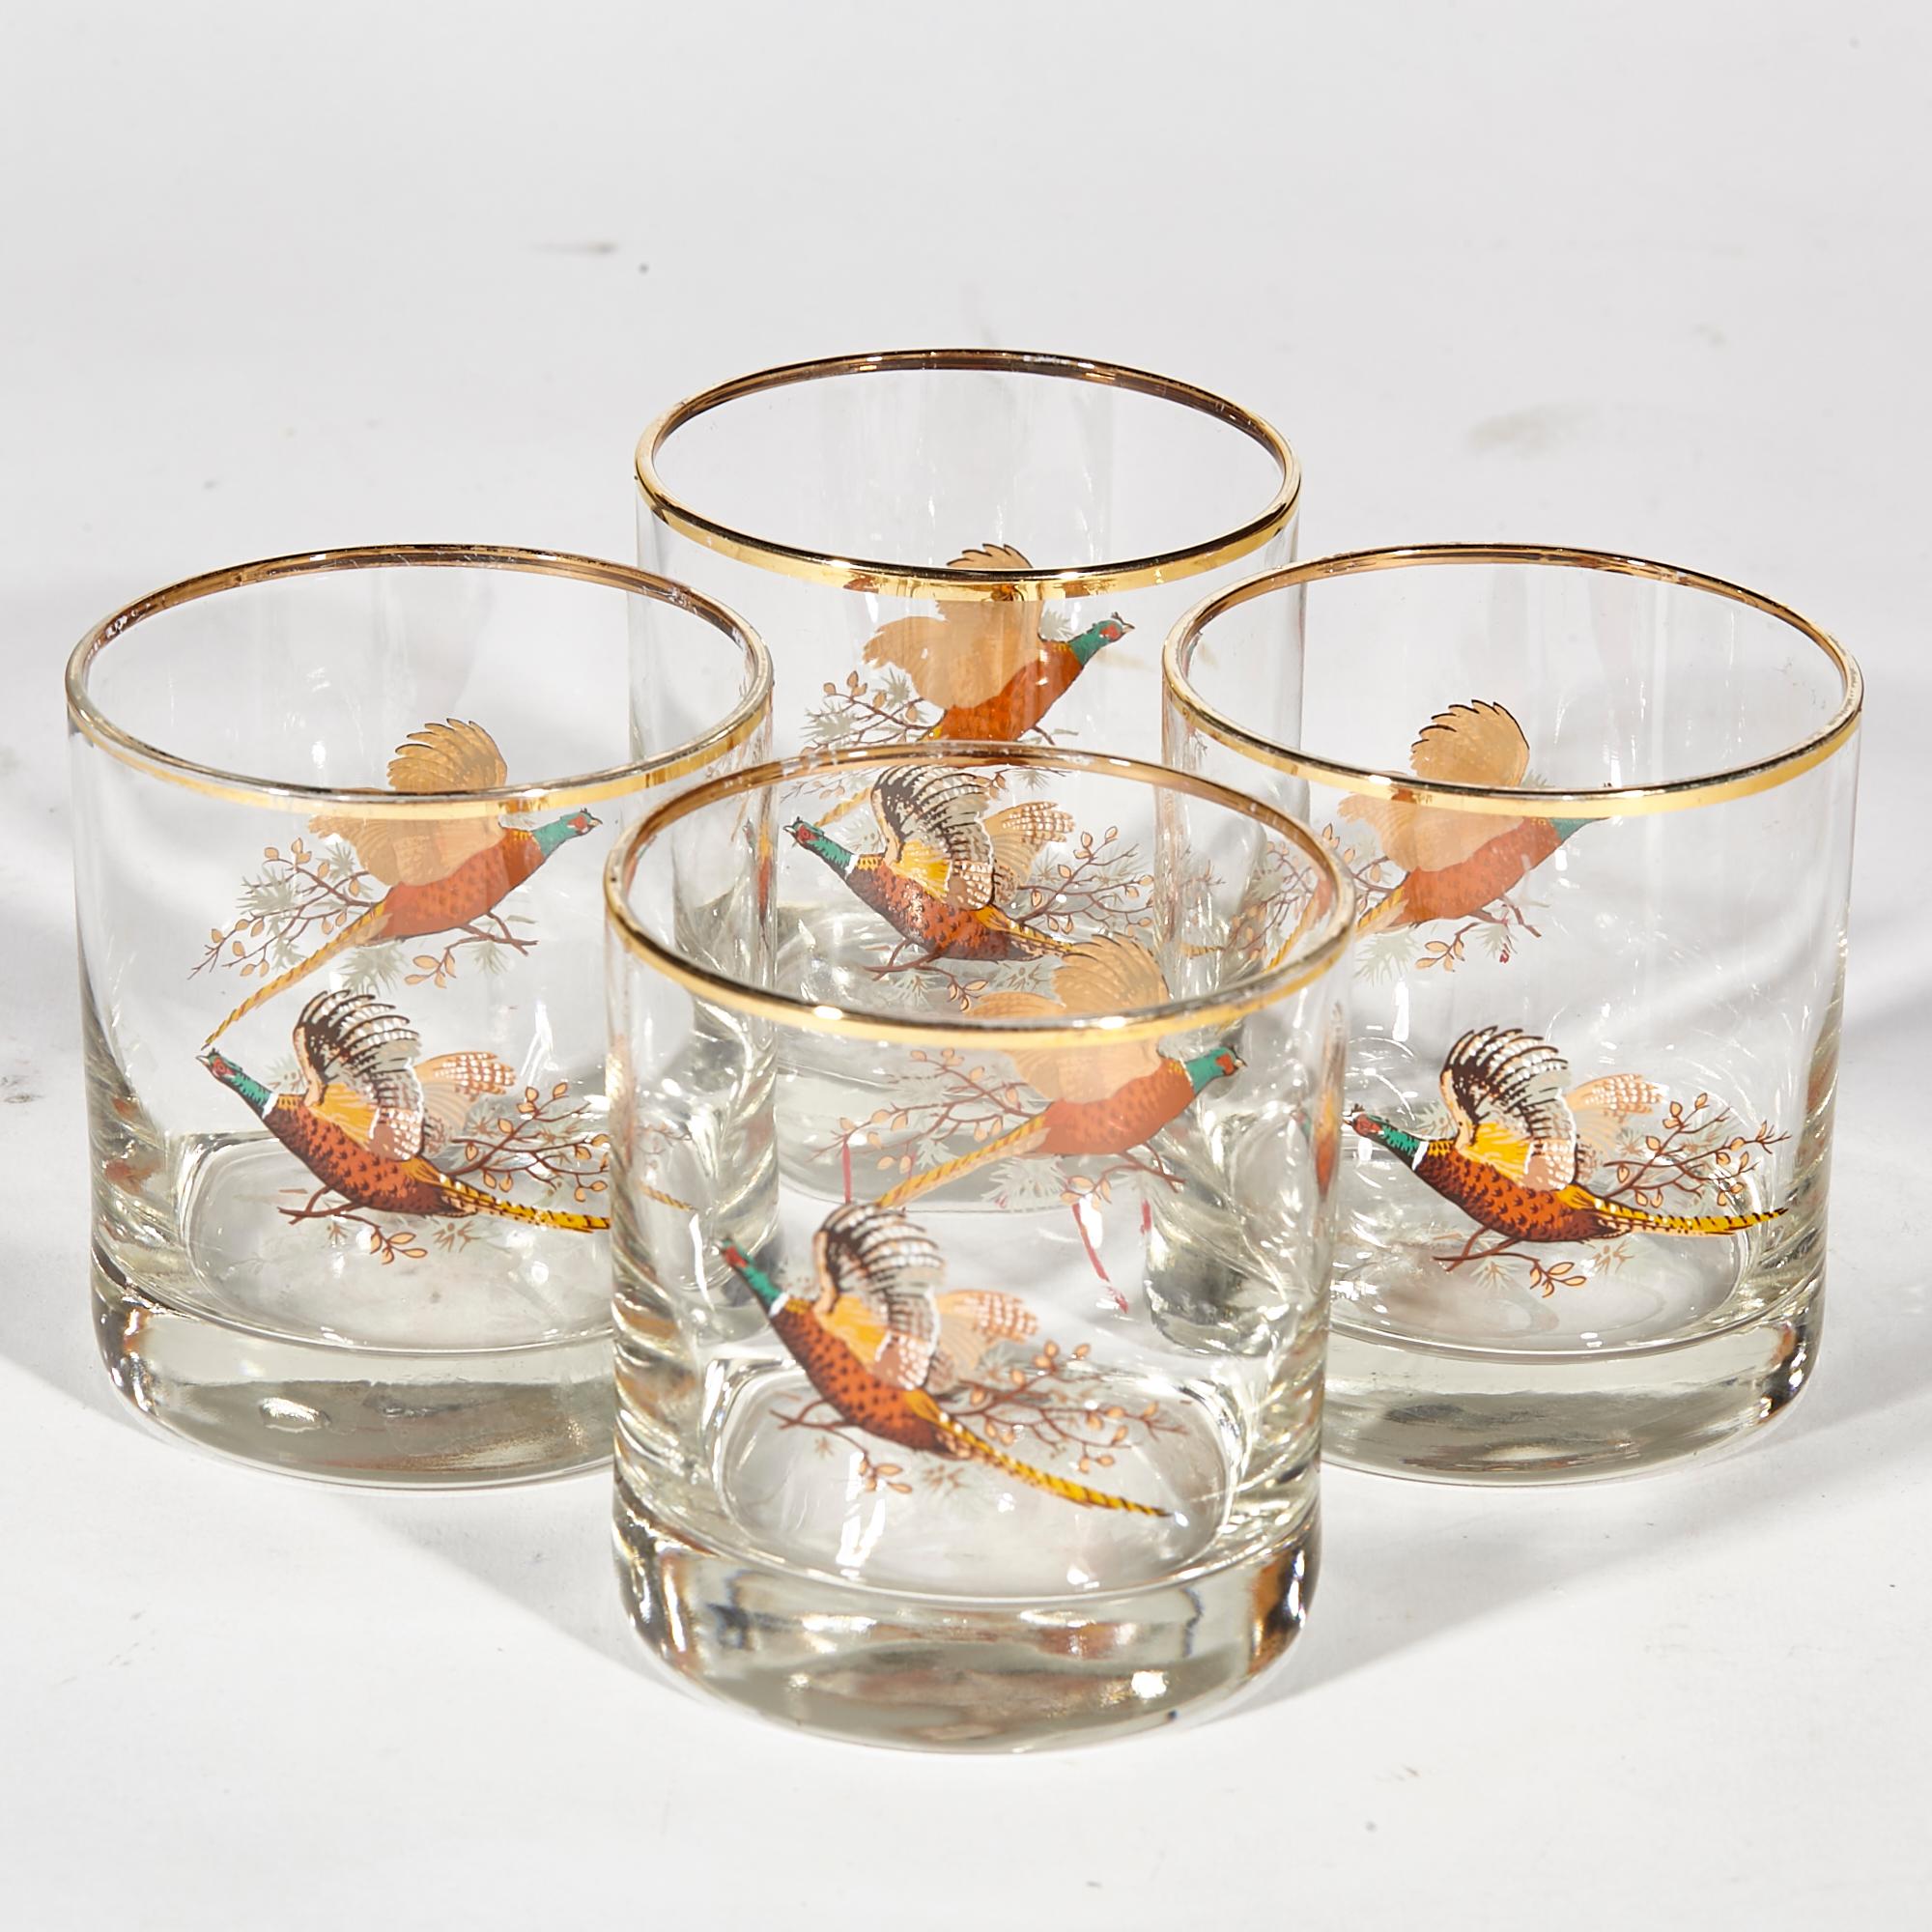 Vintage 1960s set of four pheasant glass bar tumblers with gilt rim accents. Light wear to rims. No maker's mark.